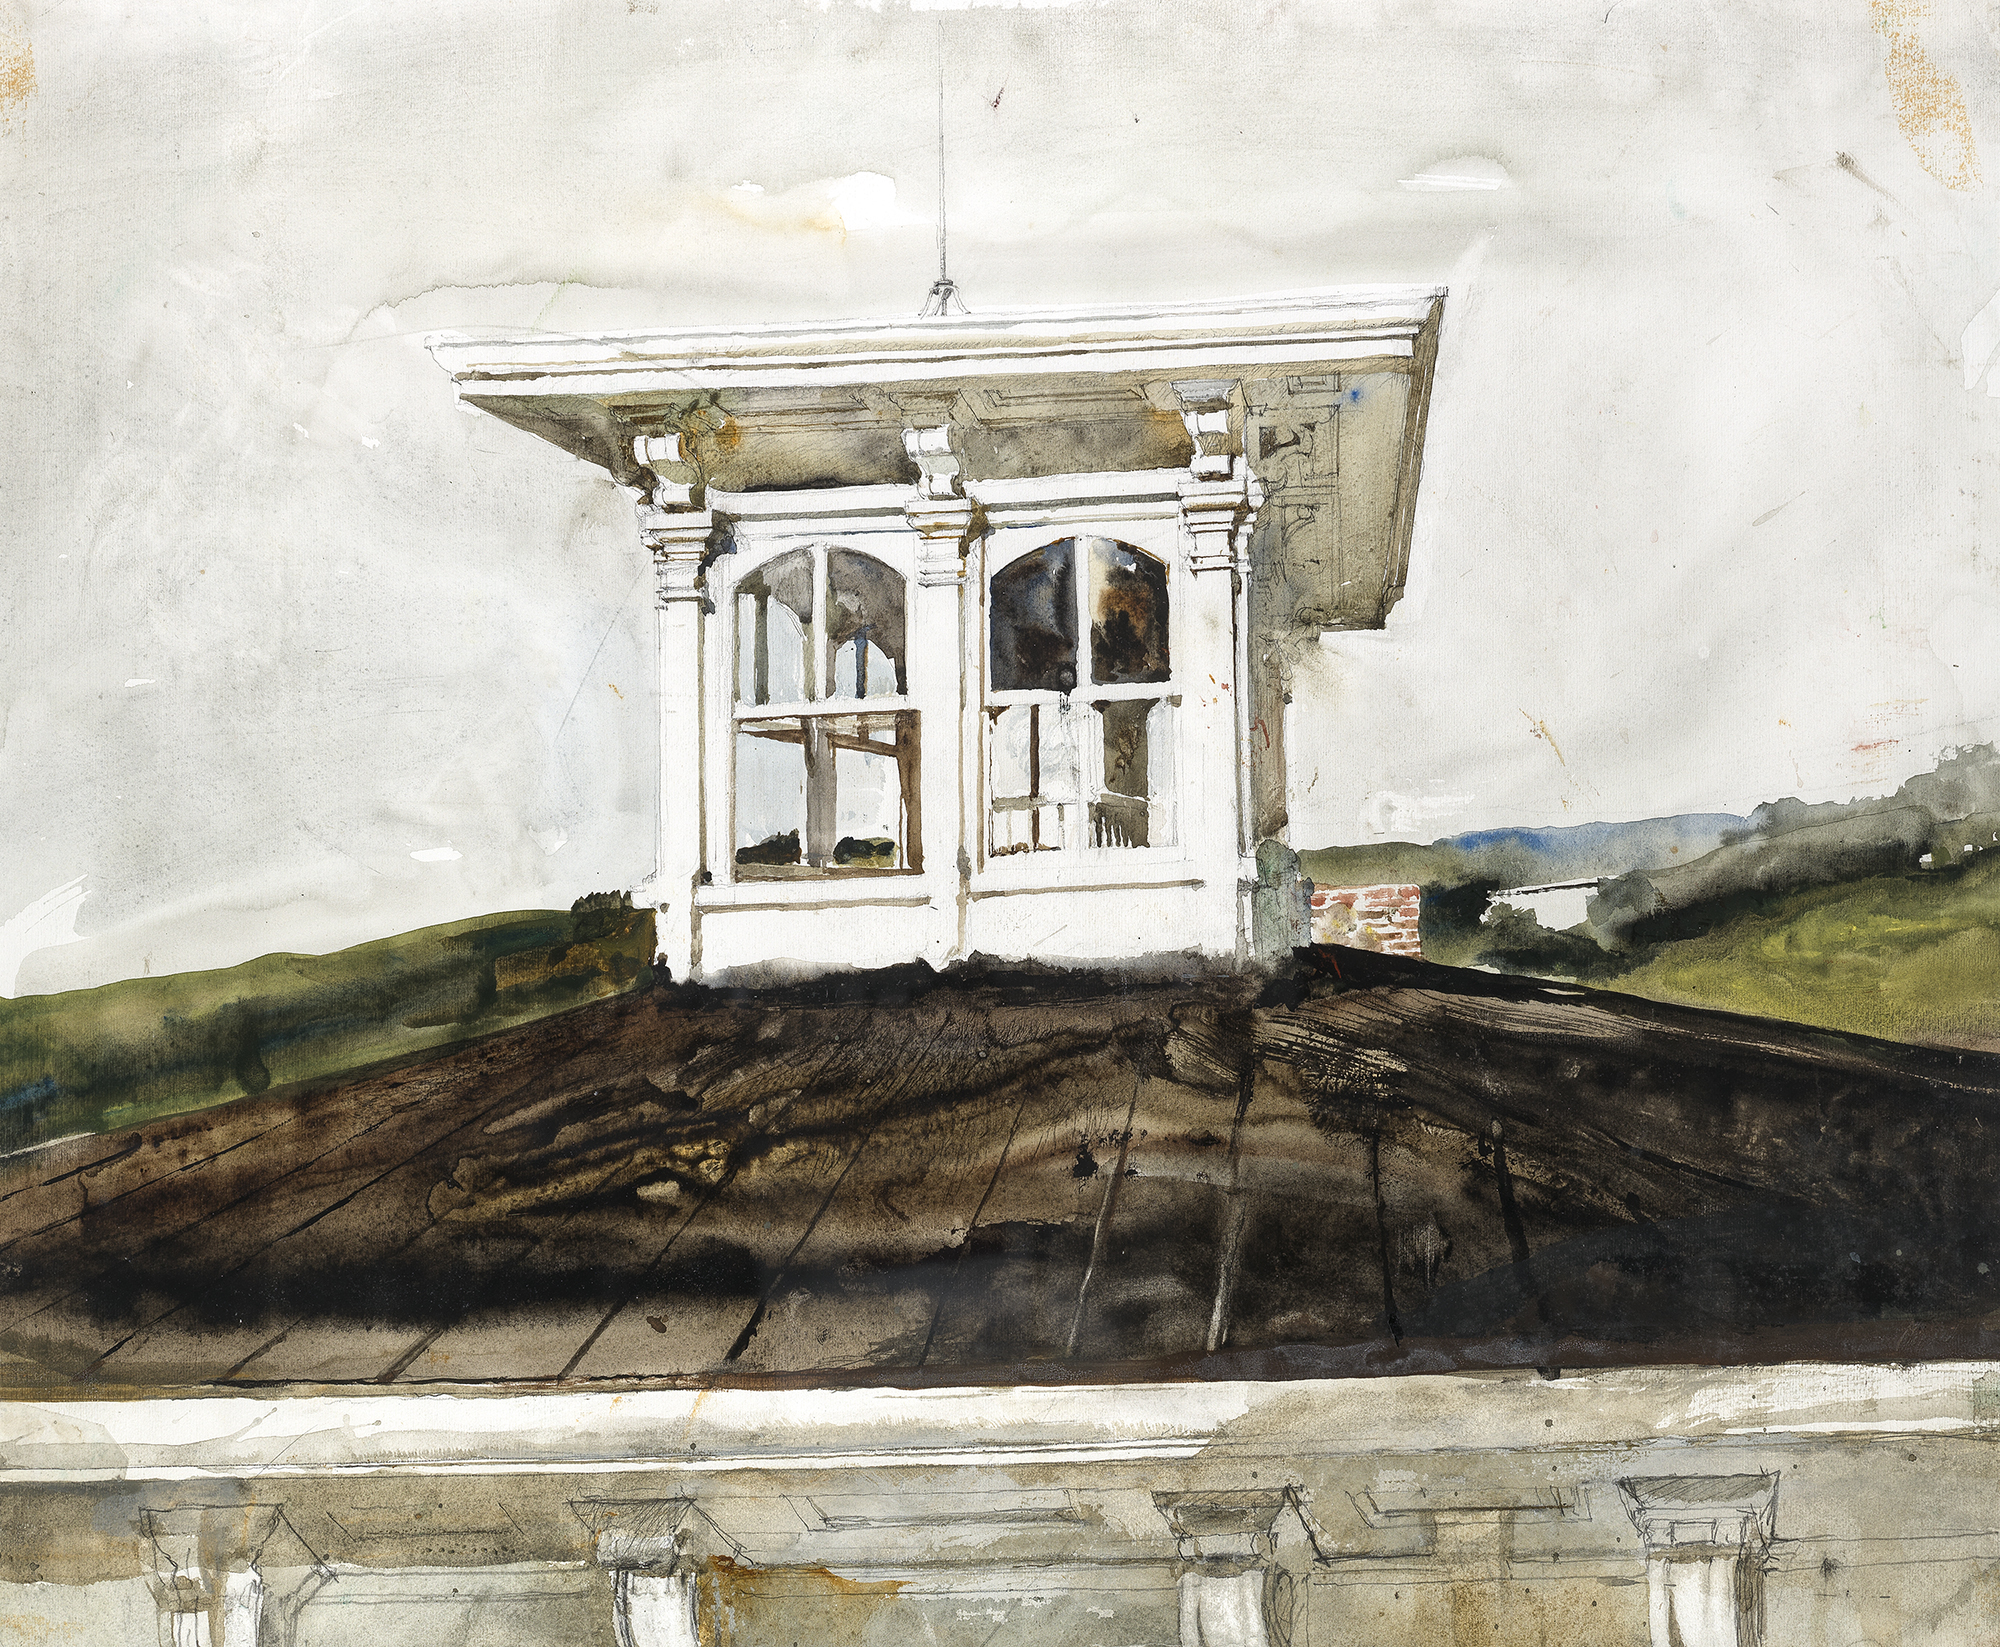 Andrew Wyeth, Widow’s Walk Study, 1990, watercolor and pencil on paper. Collection of the Wyeth Foundation for American Art B3144 © Wyeth Foundation for American Art/Artists Rights Society (ARS), NY